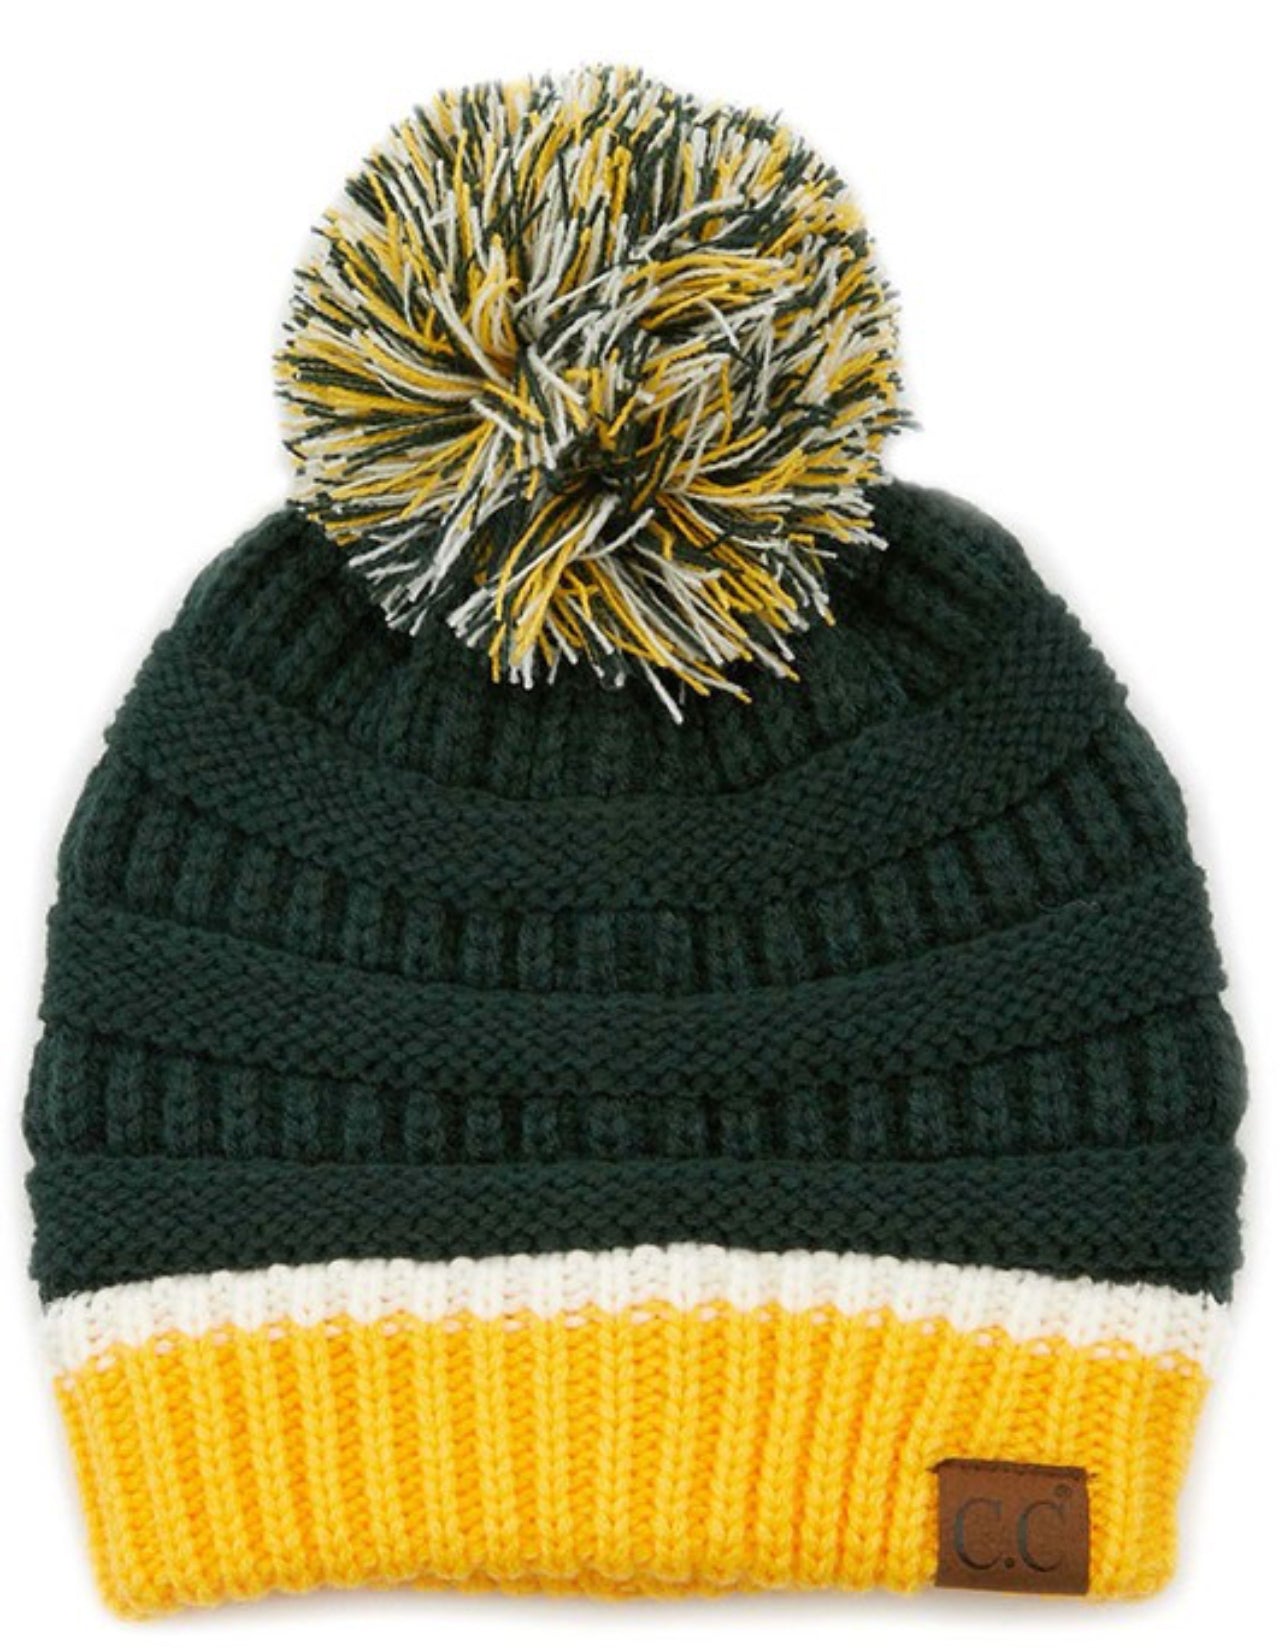 C.C Adult Game Day Beanie